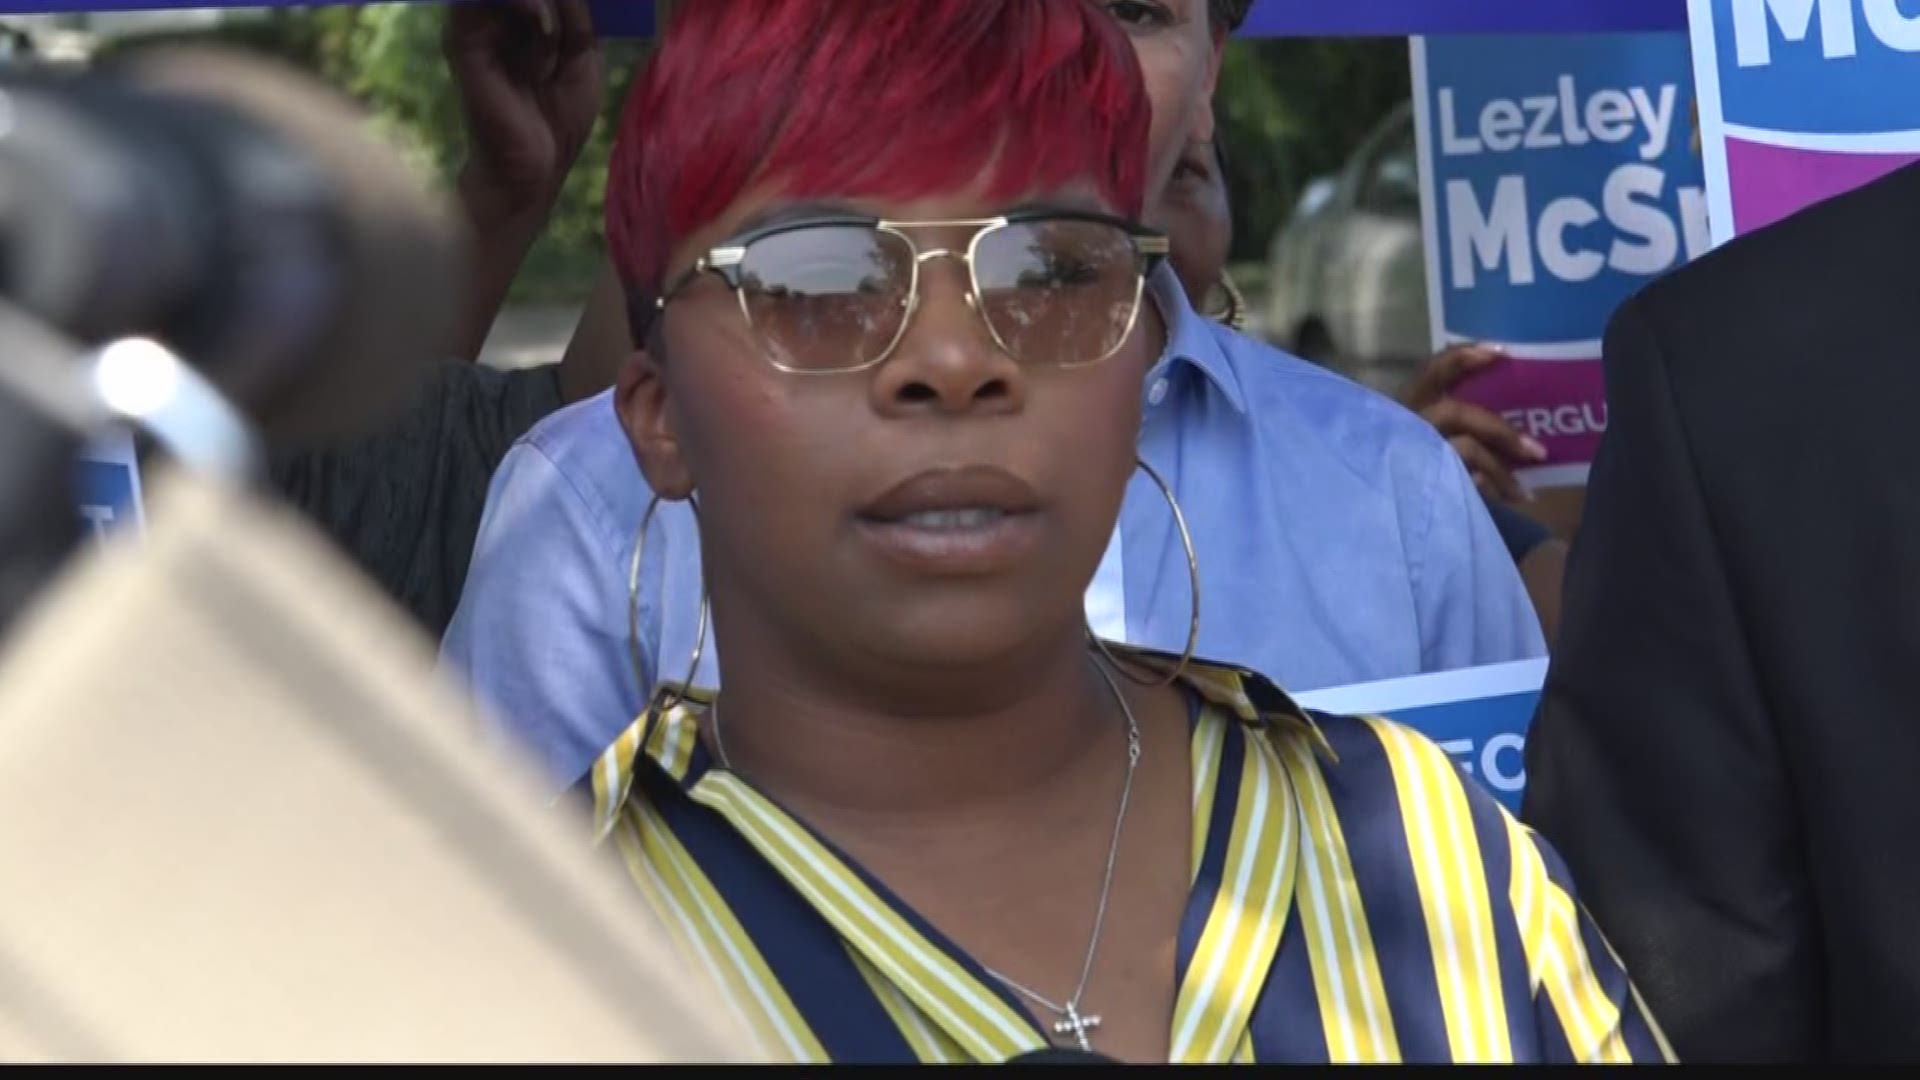 It's another step forward for the mother of Michael Brown as she officially declares her candidacy for elected office.